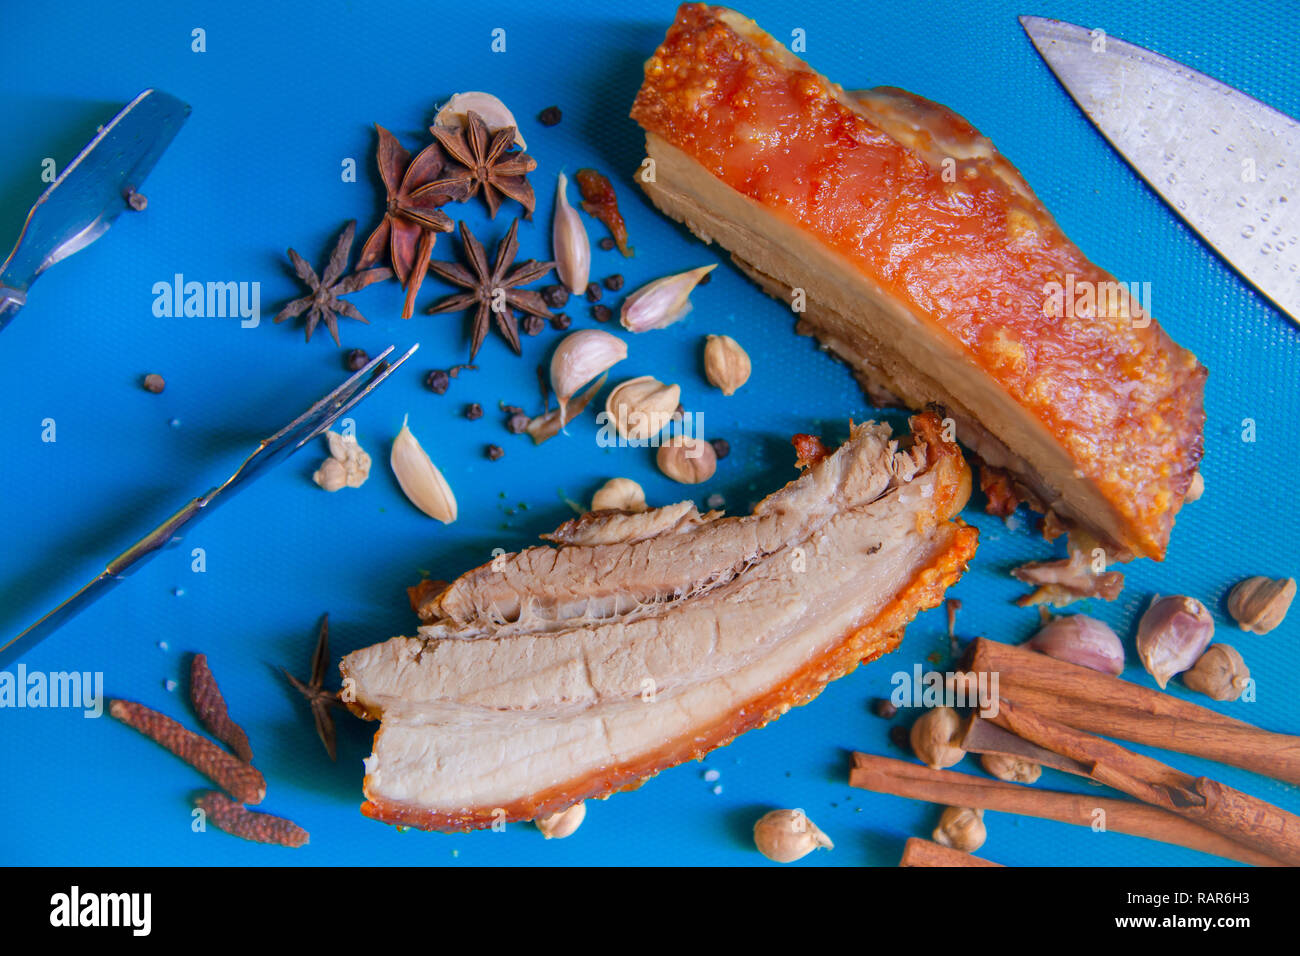 Roasted Pork belly bacon or Streaky Pork with aroma herbal food decoration. Stock Photo